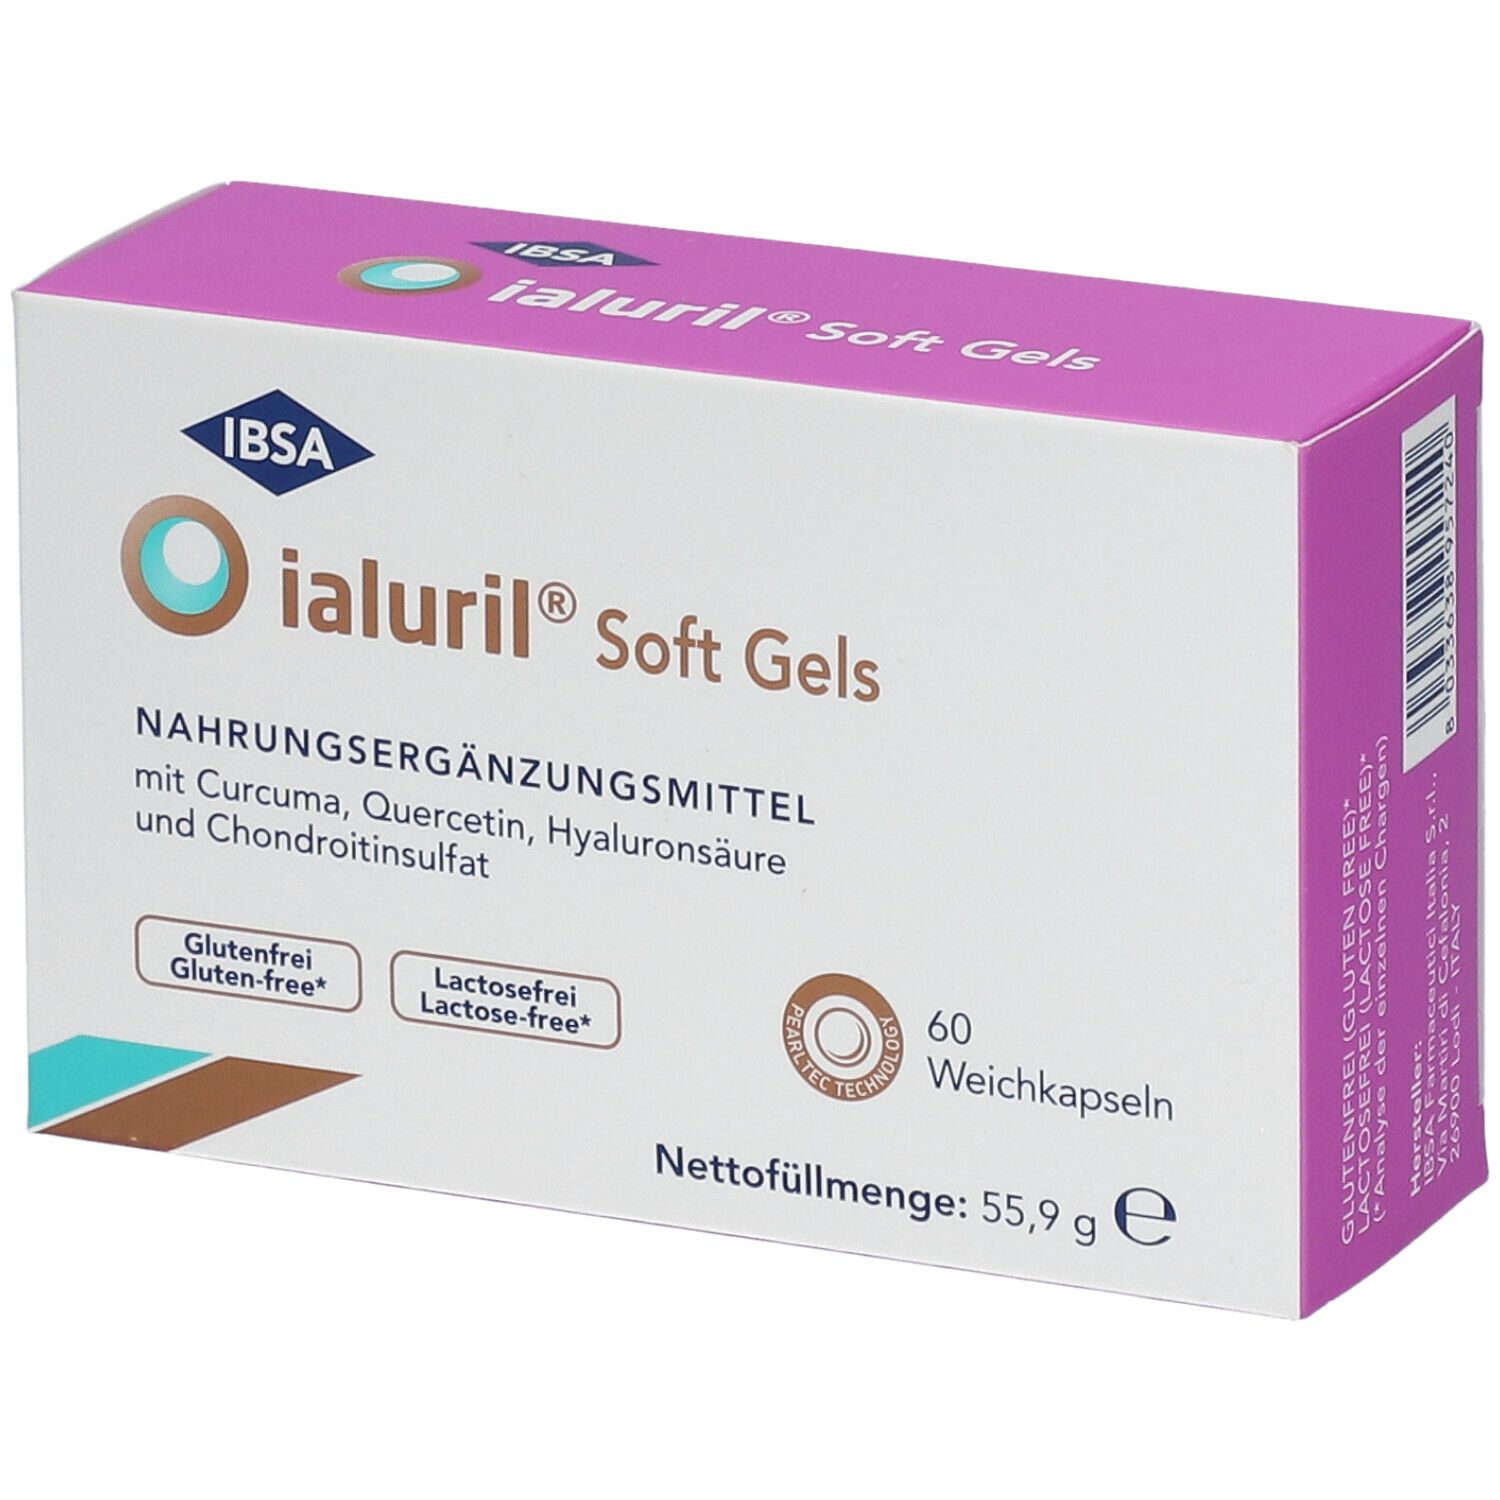 Oialuril® Soft Gels